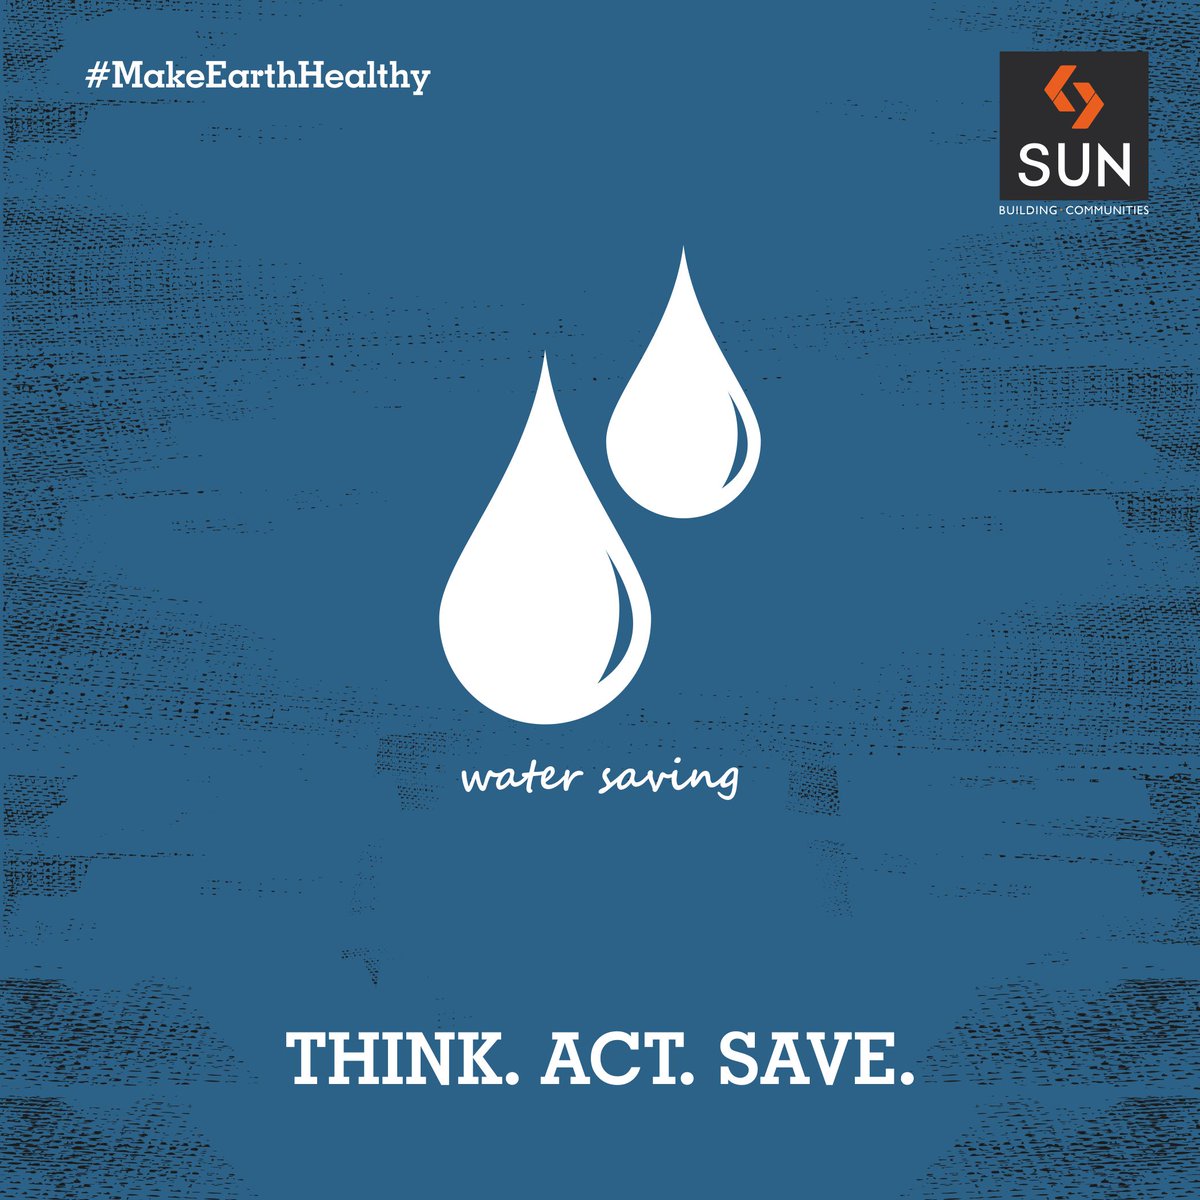 #MakeEarthHealthy
Save water and get rewards in the future. https://t.co/CRWkdxjbIE